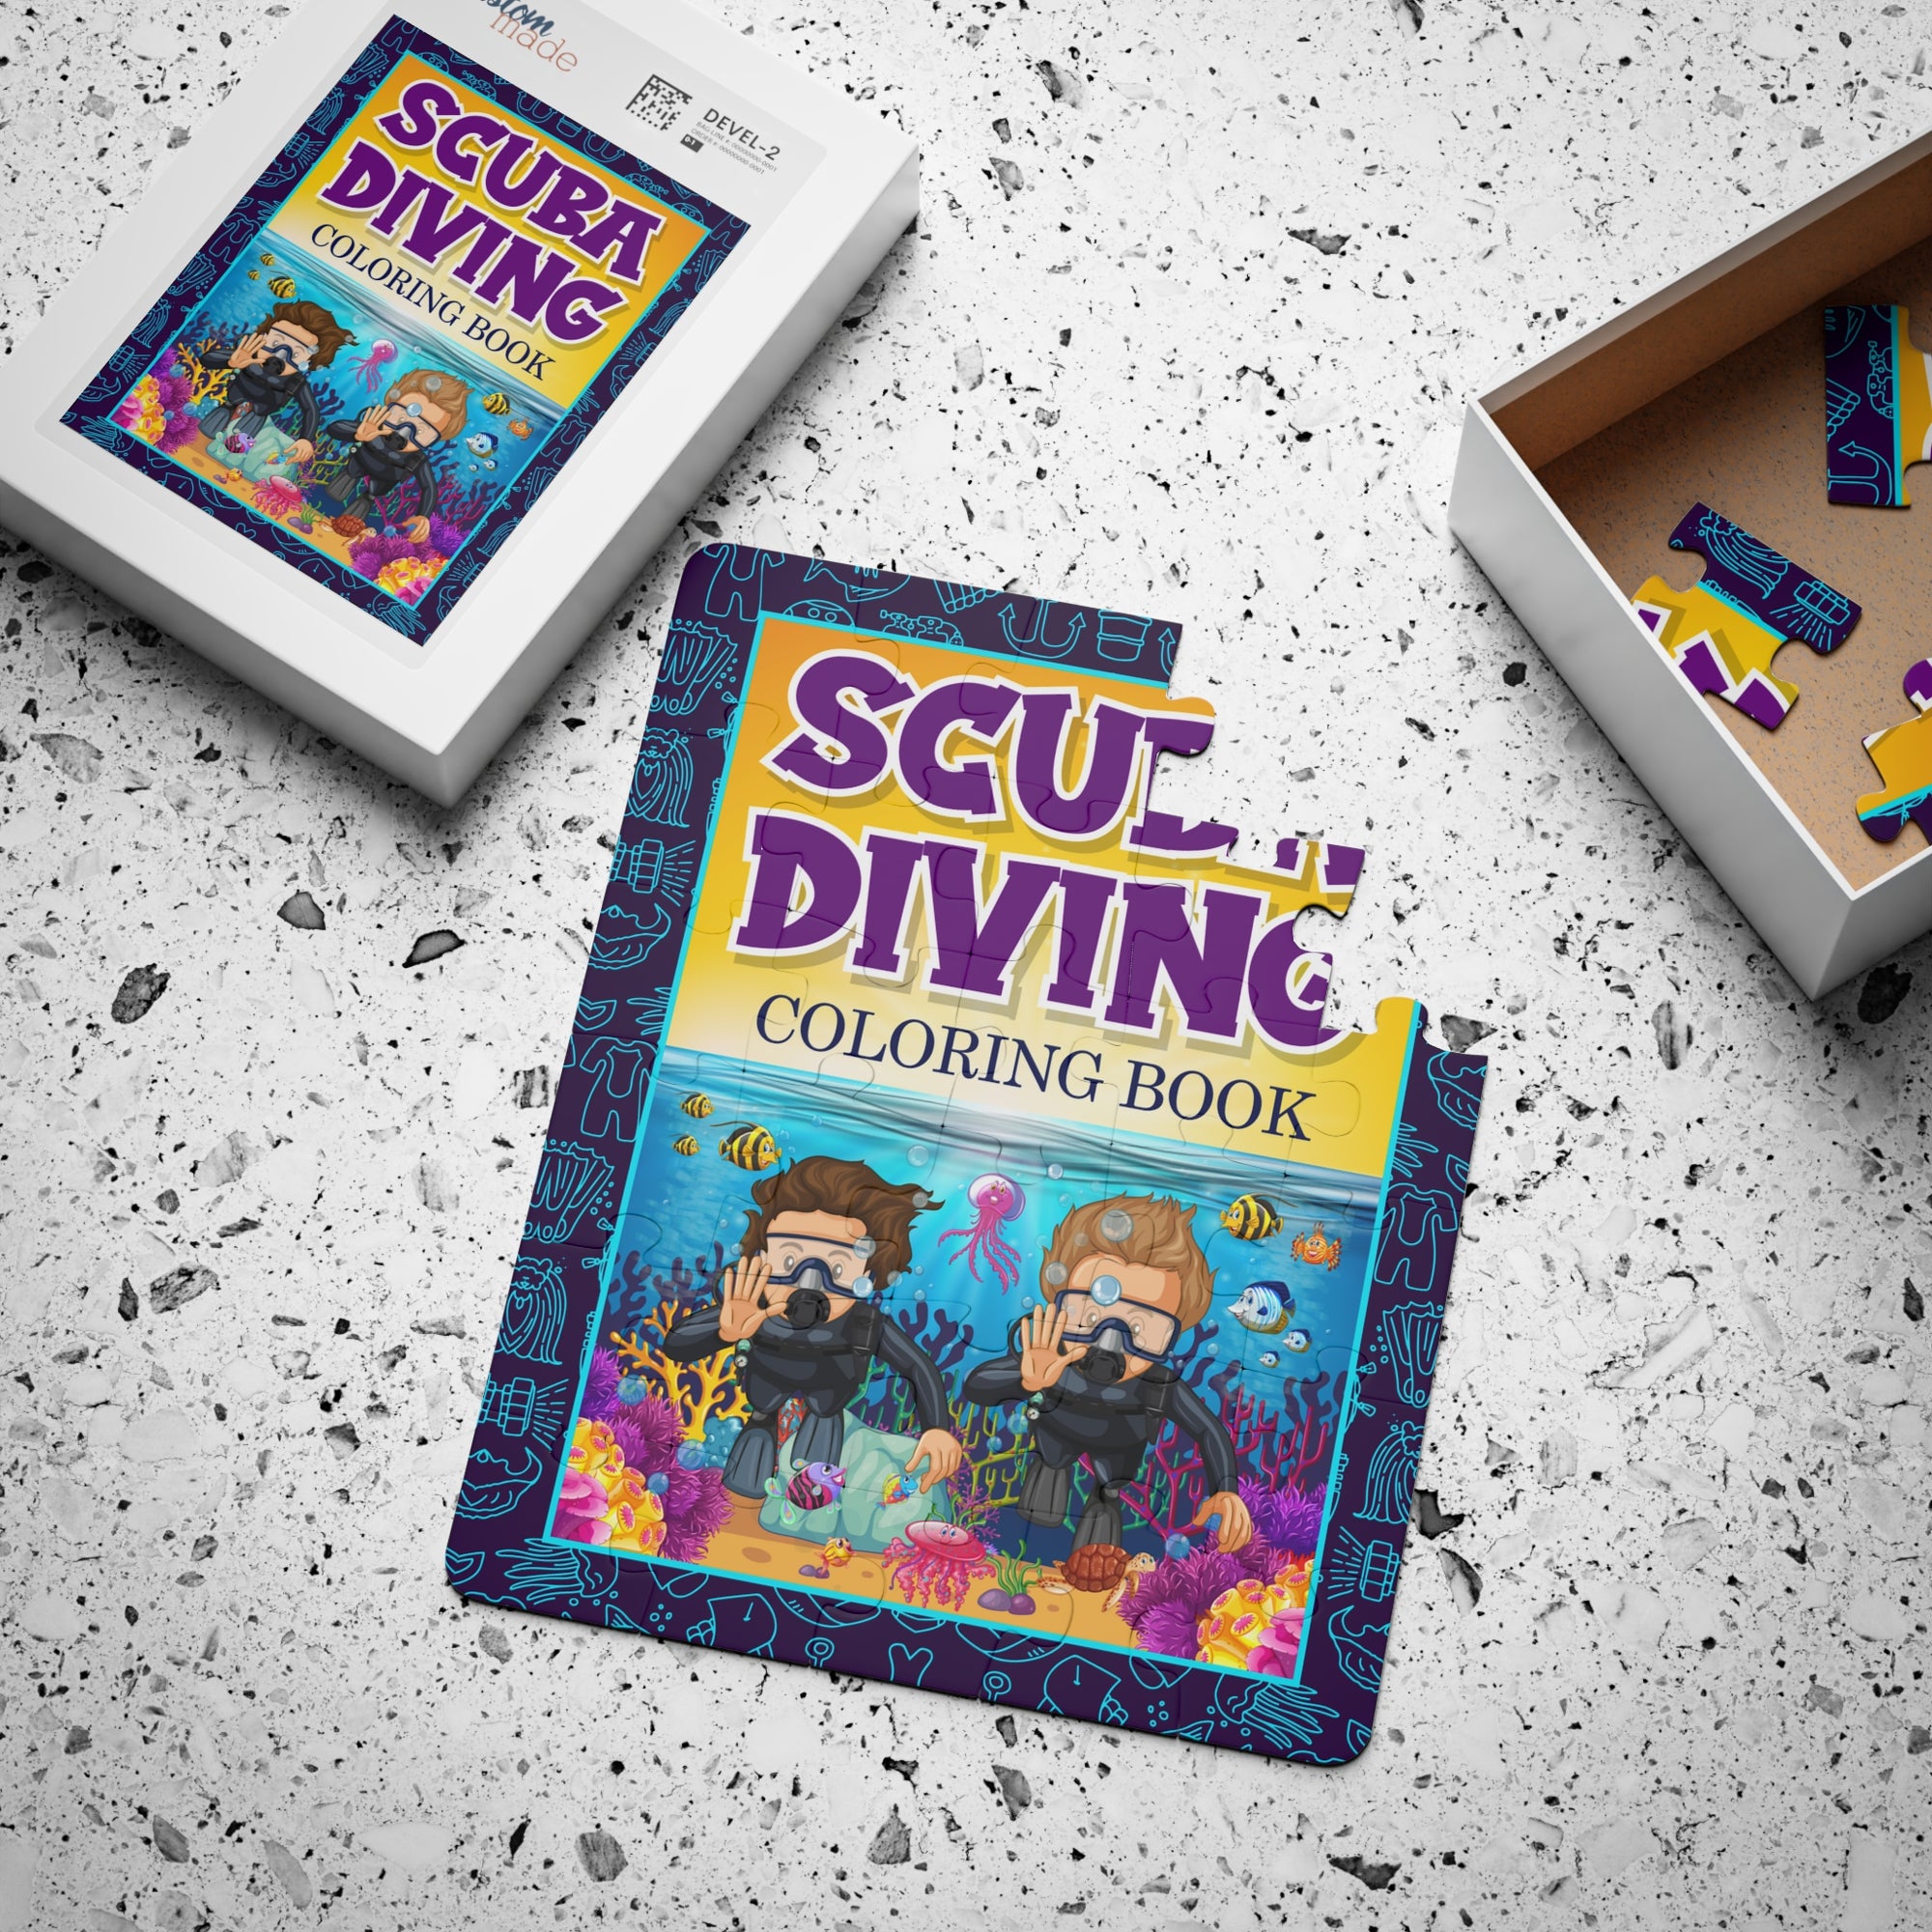 Scuba Diving Coloring Book Jigsaw Puzzle, 30-Piece, Excellent Christmas Gift, Birthday, Summer Or Easter Holiday Gift For Kids Ages 4-8